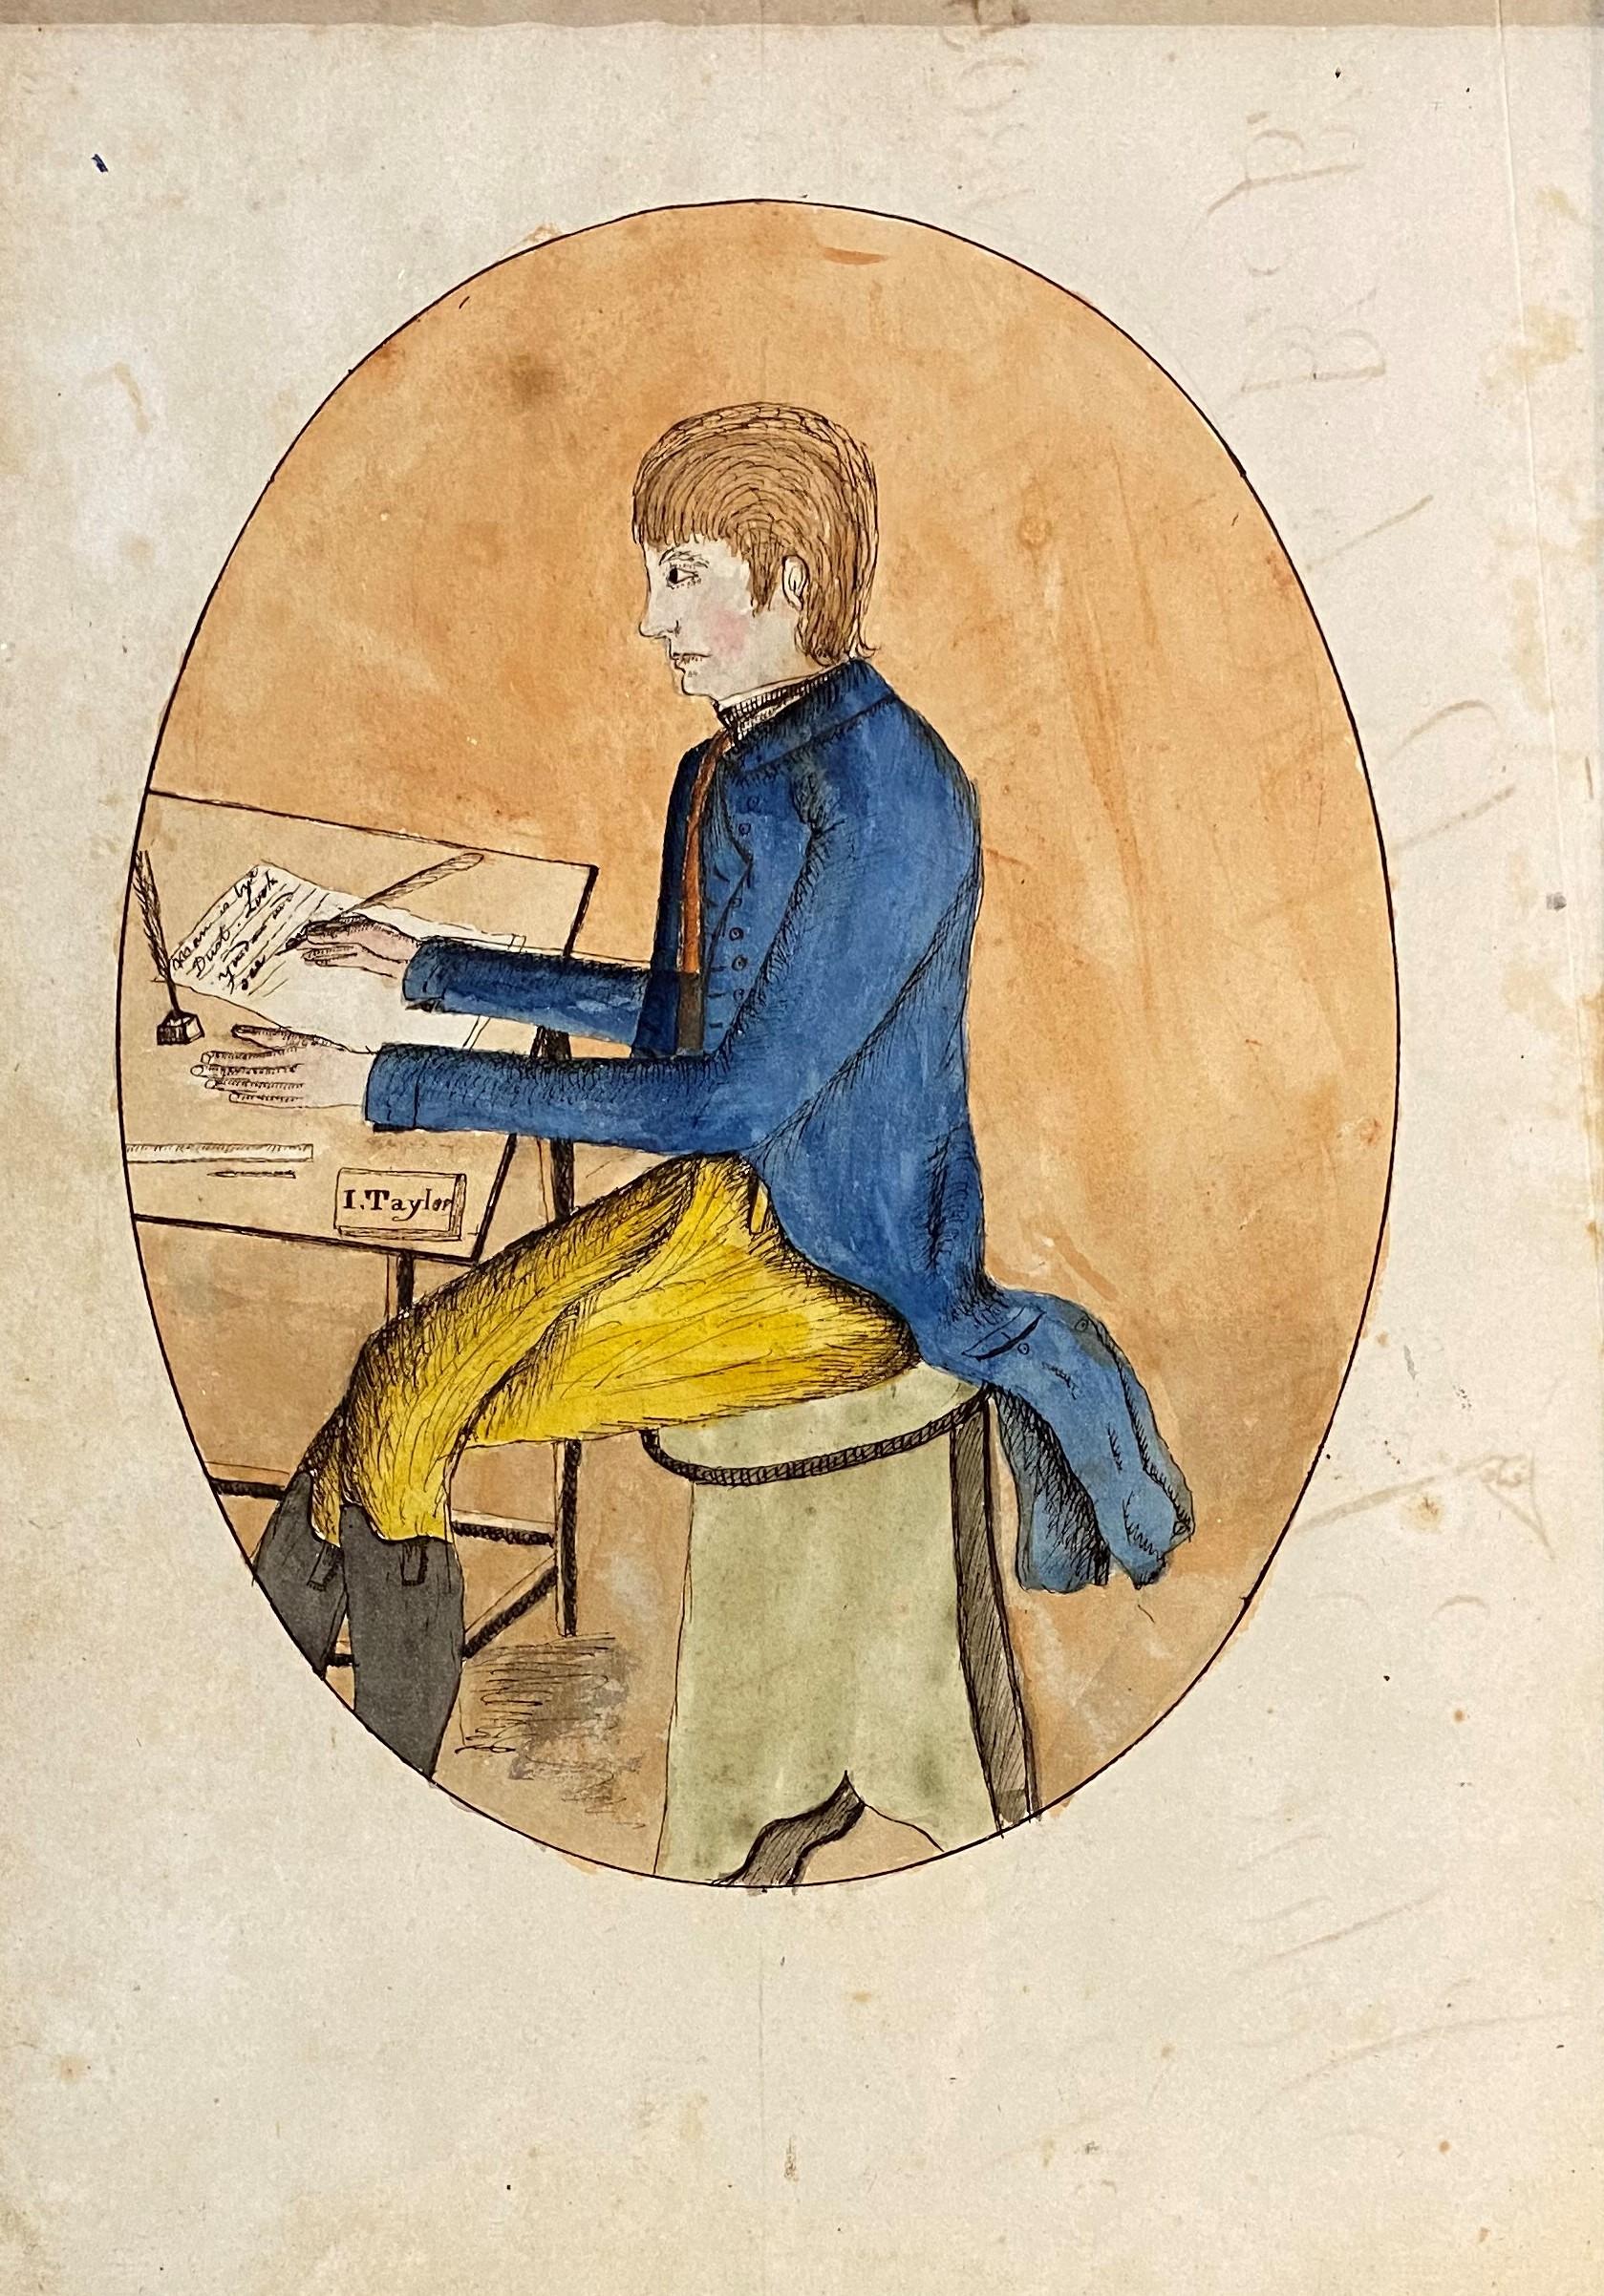 A wonderful American folk art pen and watercolor self portrait of John Taylor, Albany, NY, circa 1805-6. Taylor has drawn himself as a fashionable, industrious young man seated at his drawing table, which is, with all its implements and work, as